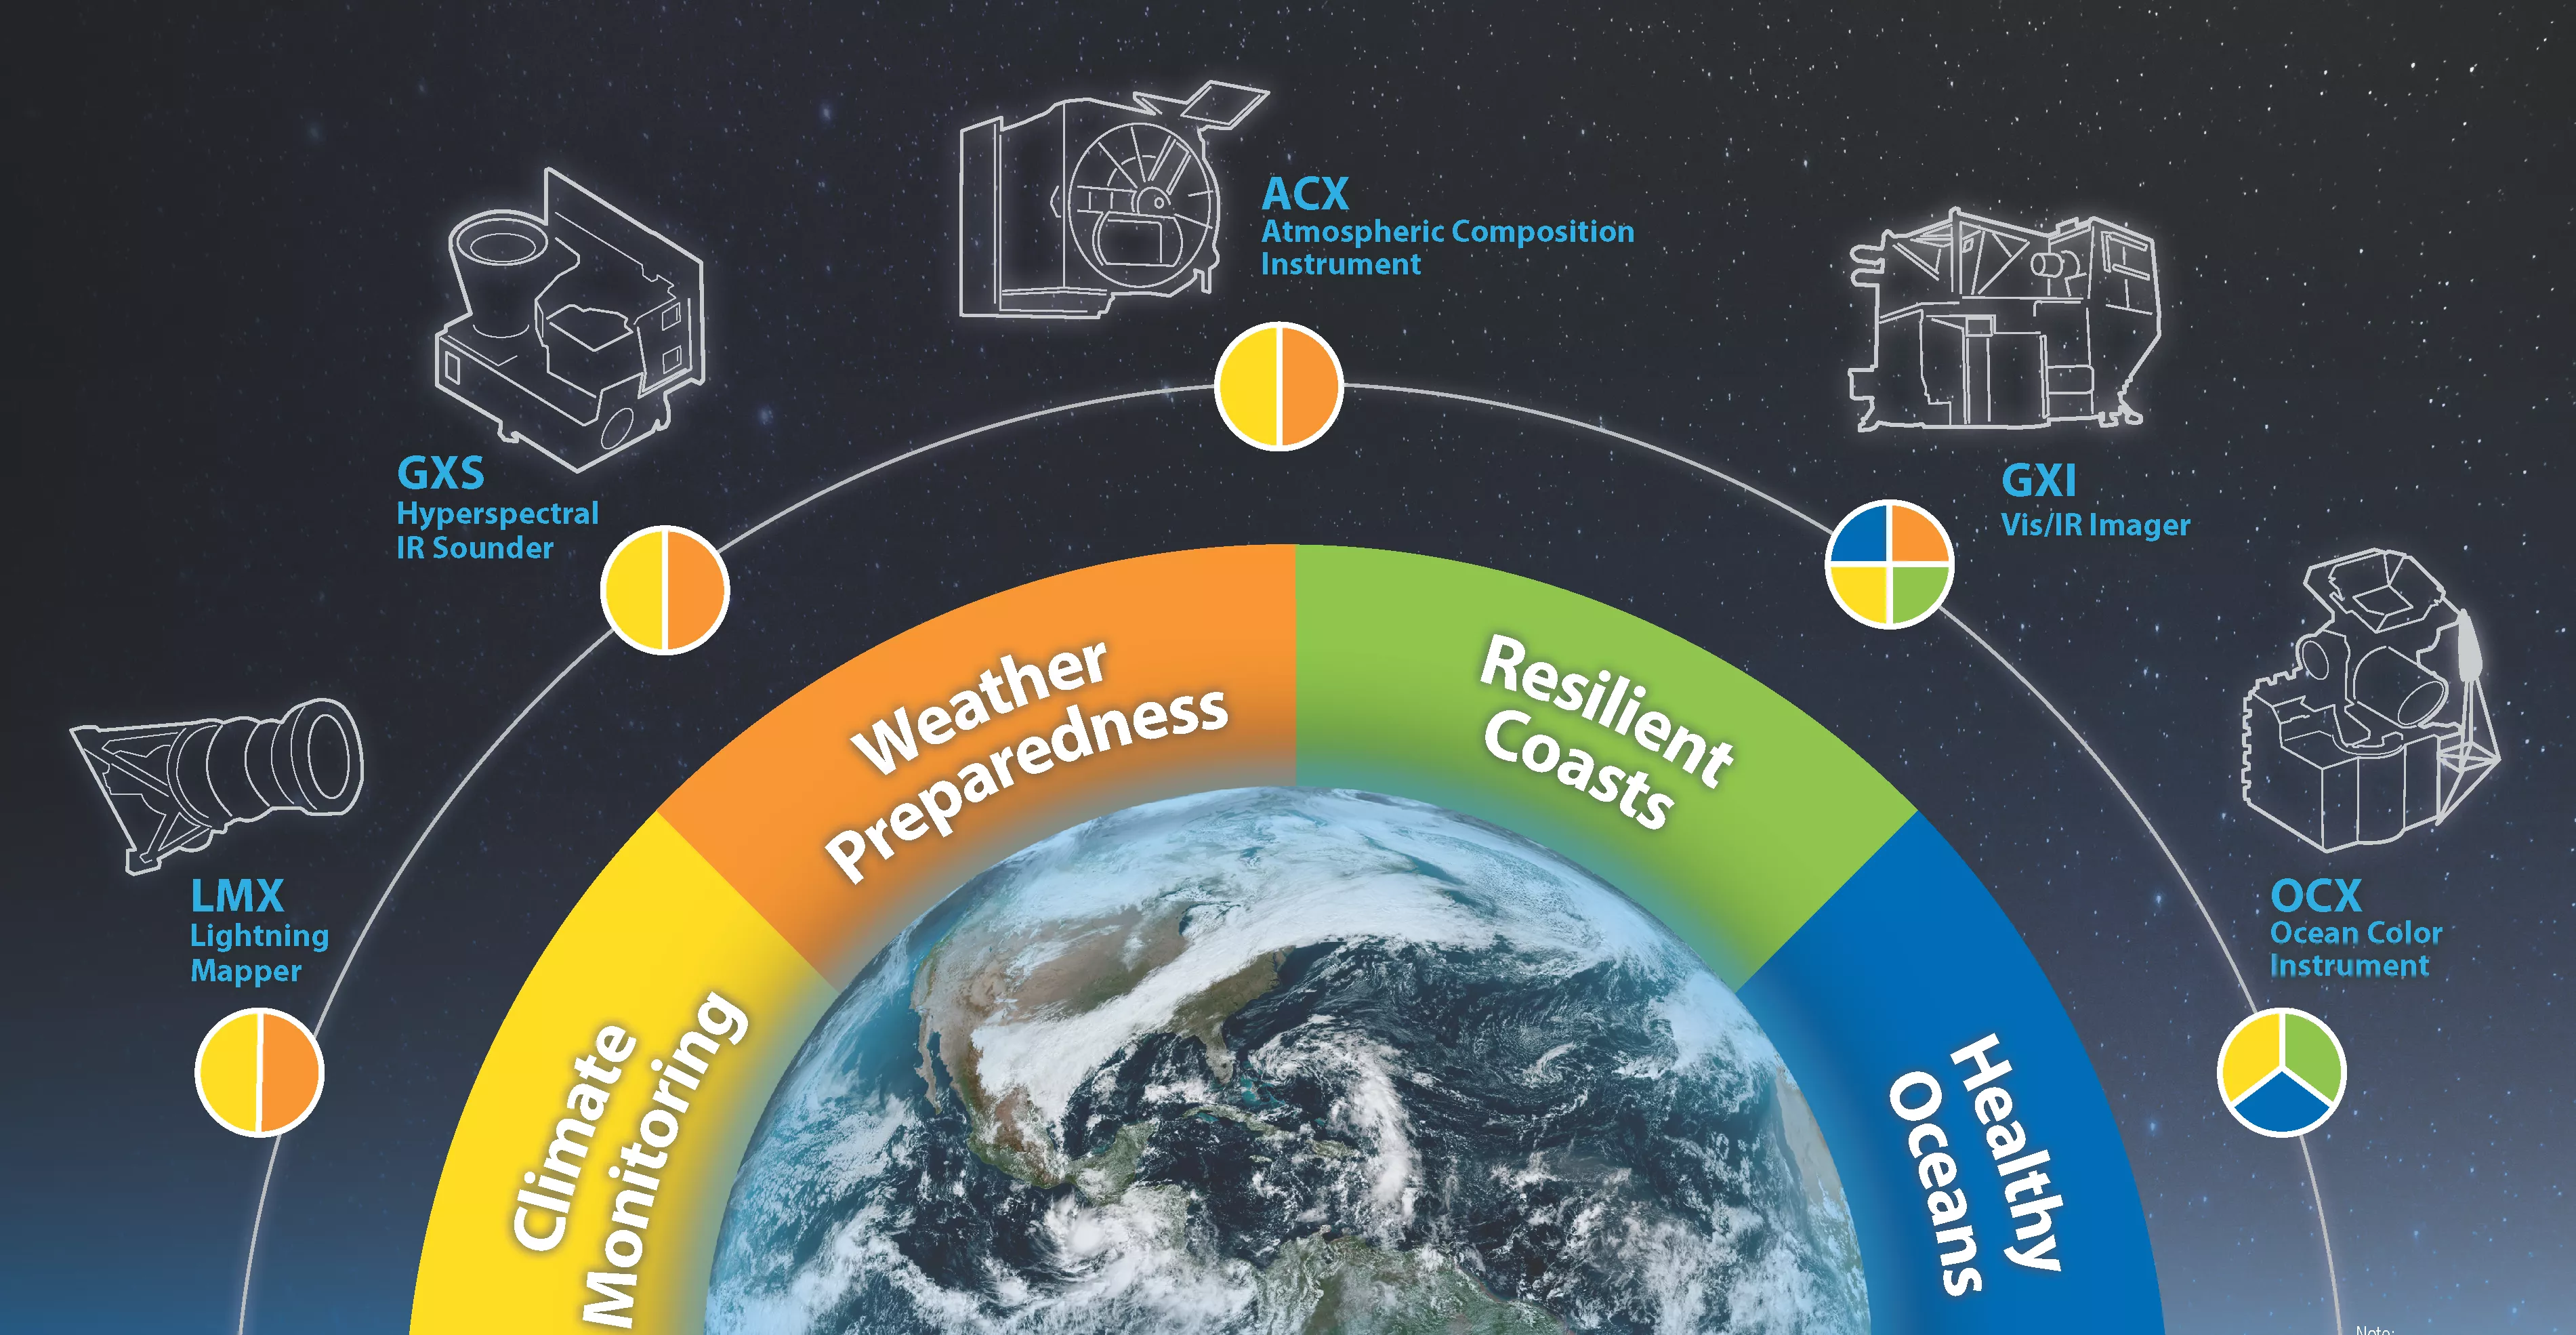 This is an infographic for the GeoXO programs instruments. It has the acronyms Lightning Mapper (LMX), Sounder (GXS), Atmospheric Composition (ACX), Imager (GXI), and Ocean Color (OCX).